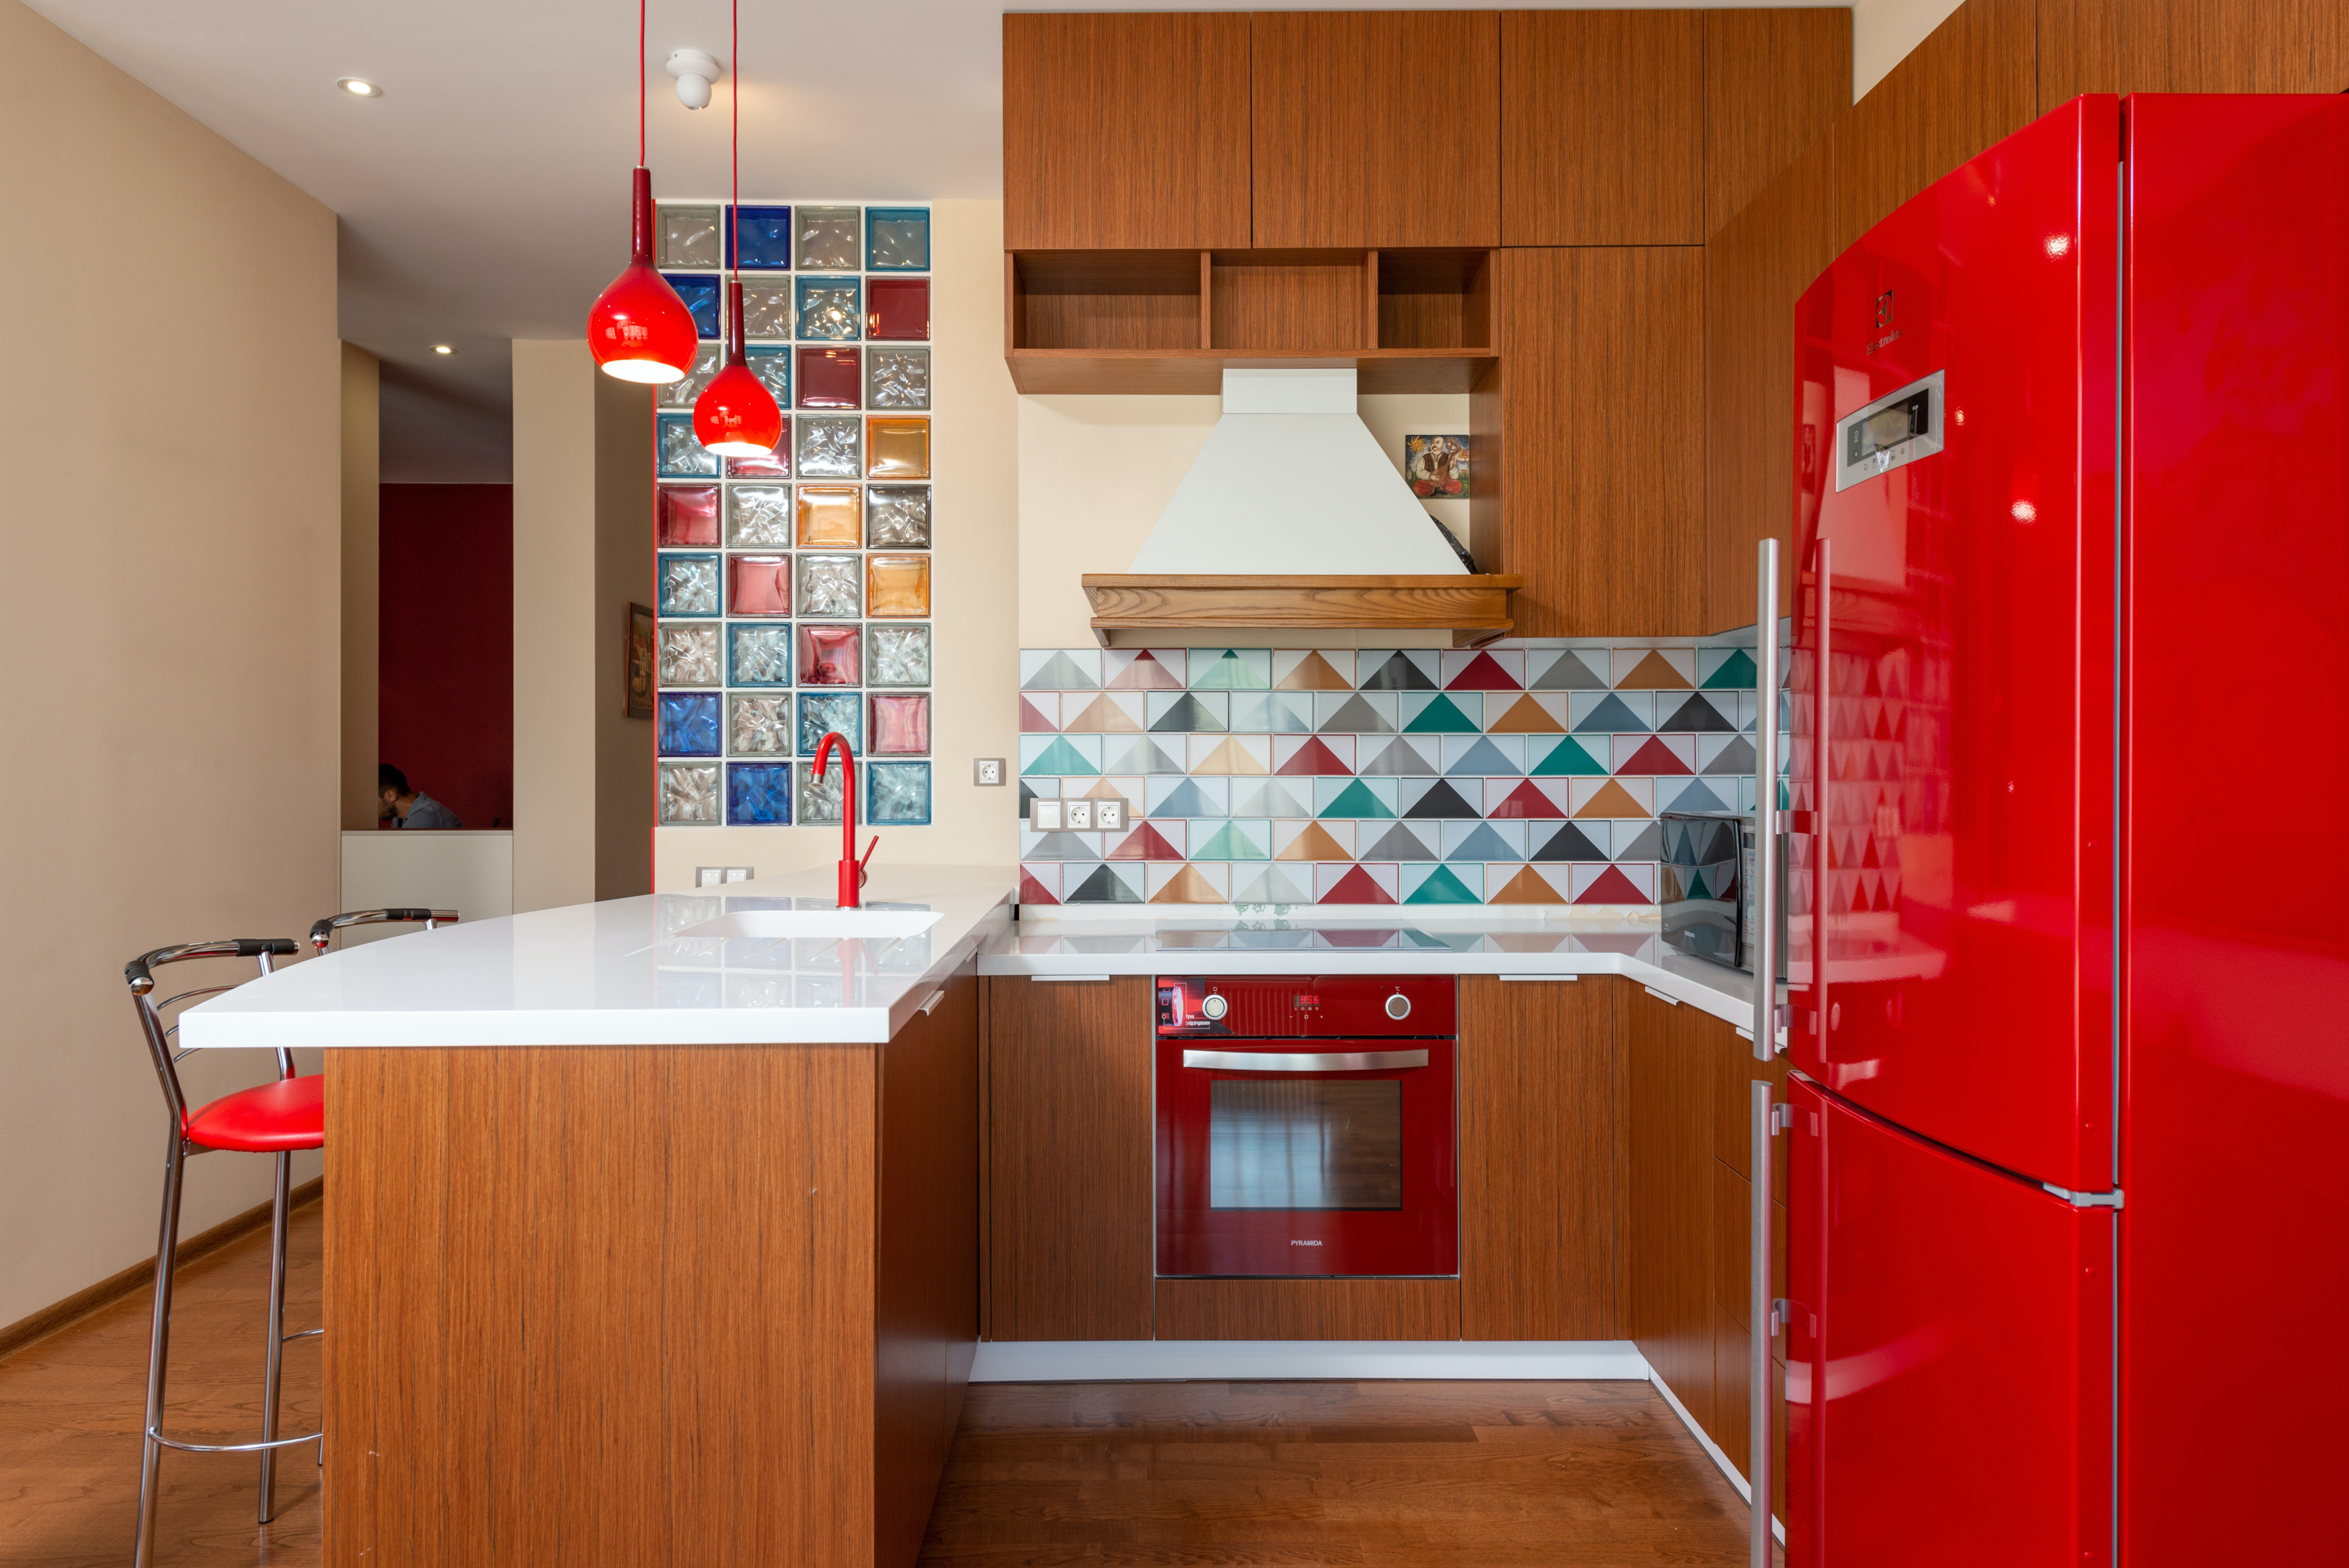 red refrigerator and stove in retro kitchen